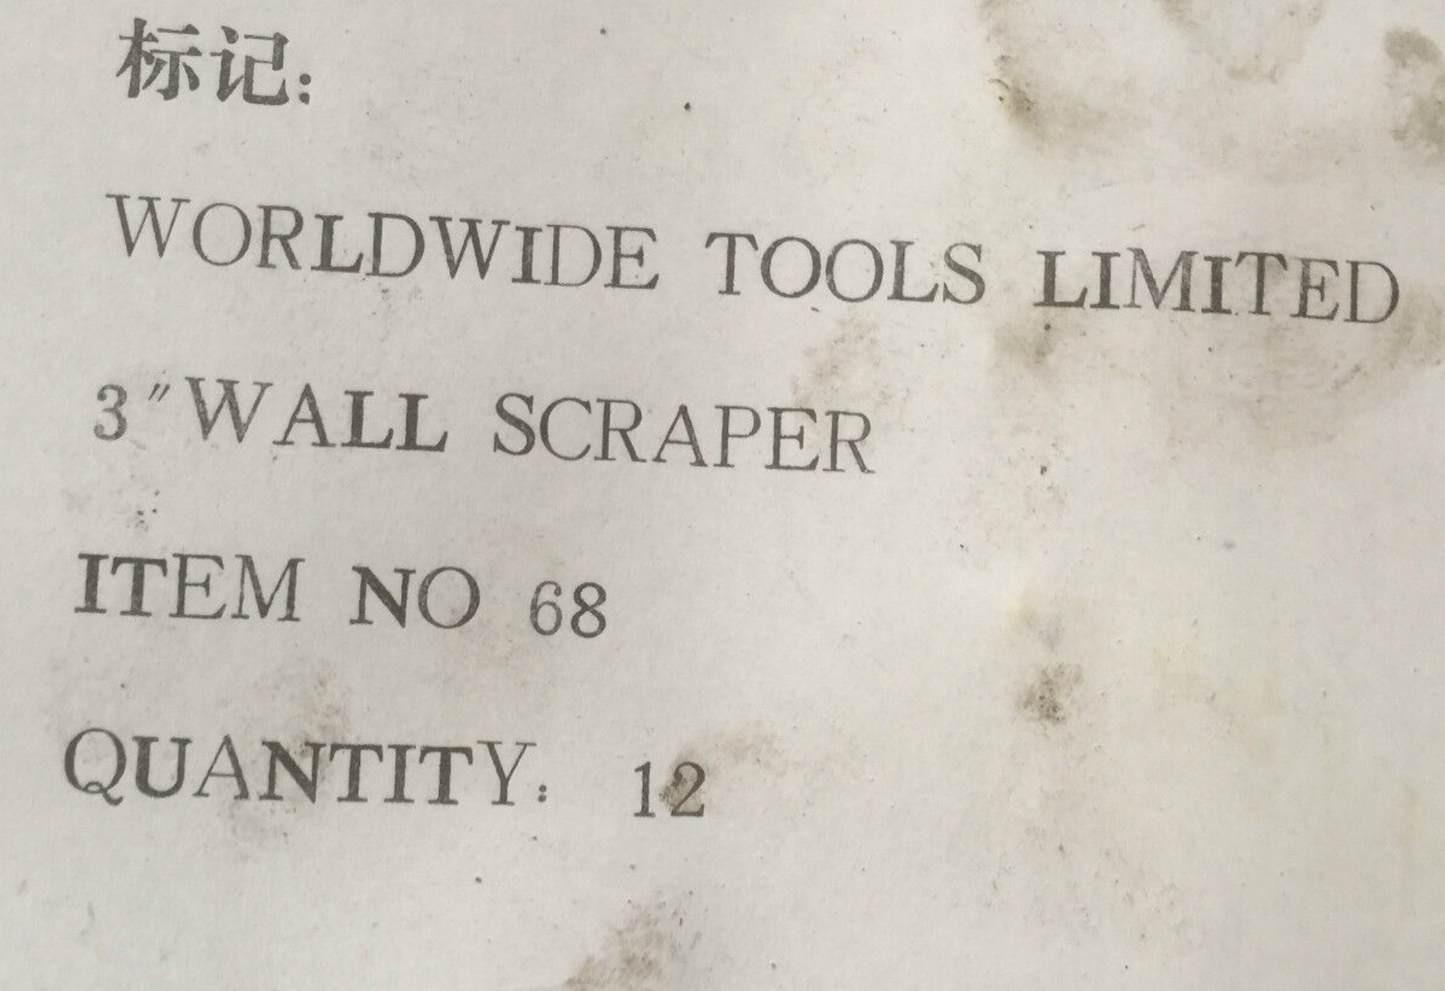 box of 12 Worldwide Tools   3" Wall Scaper  No68 W1C6